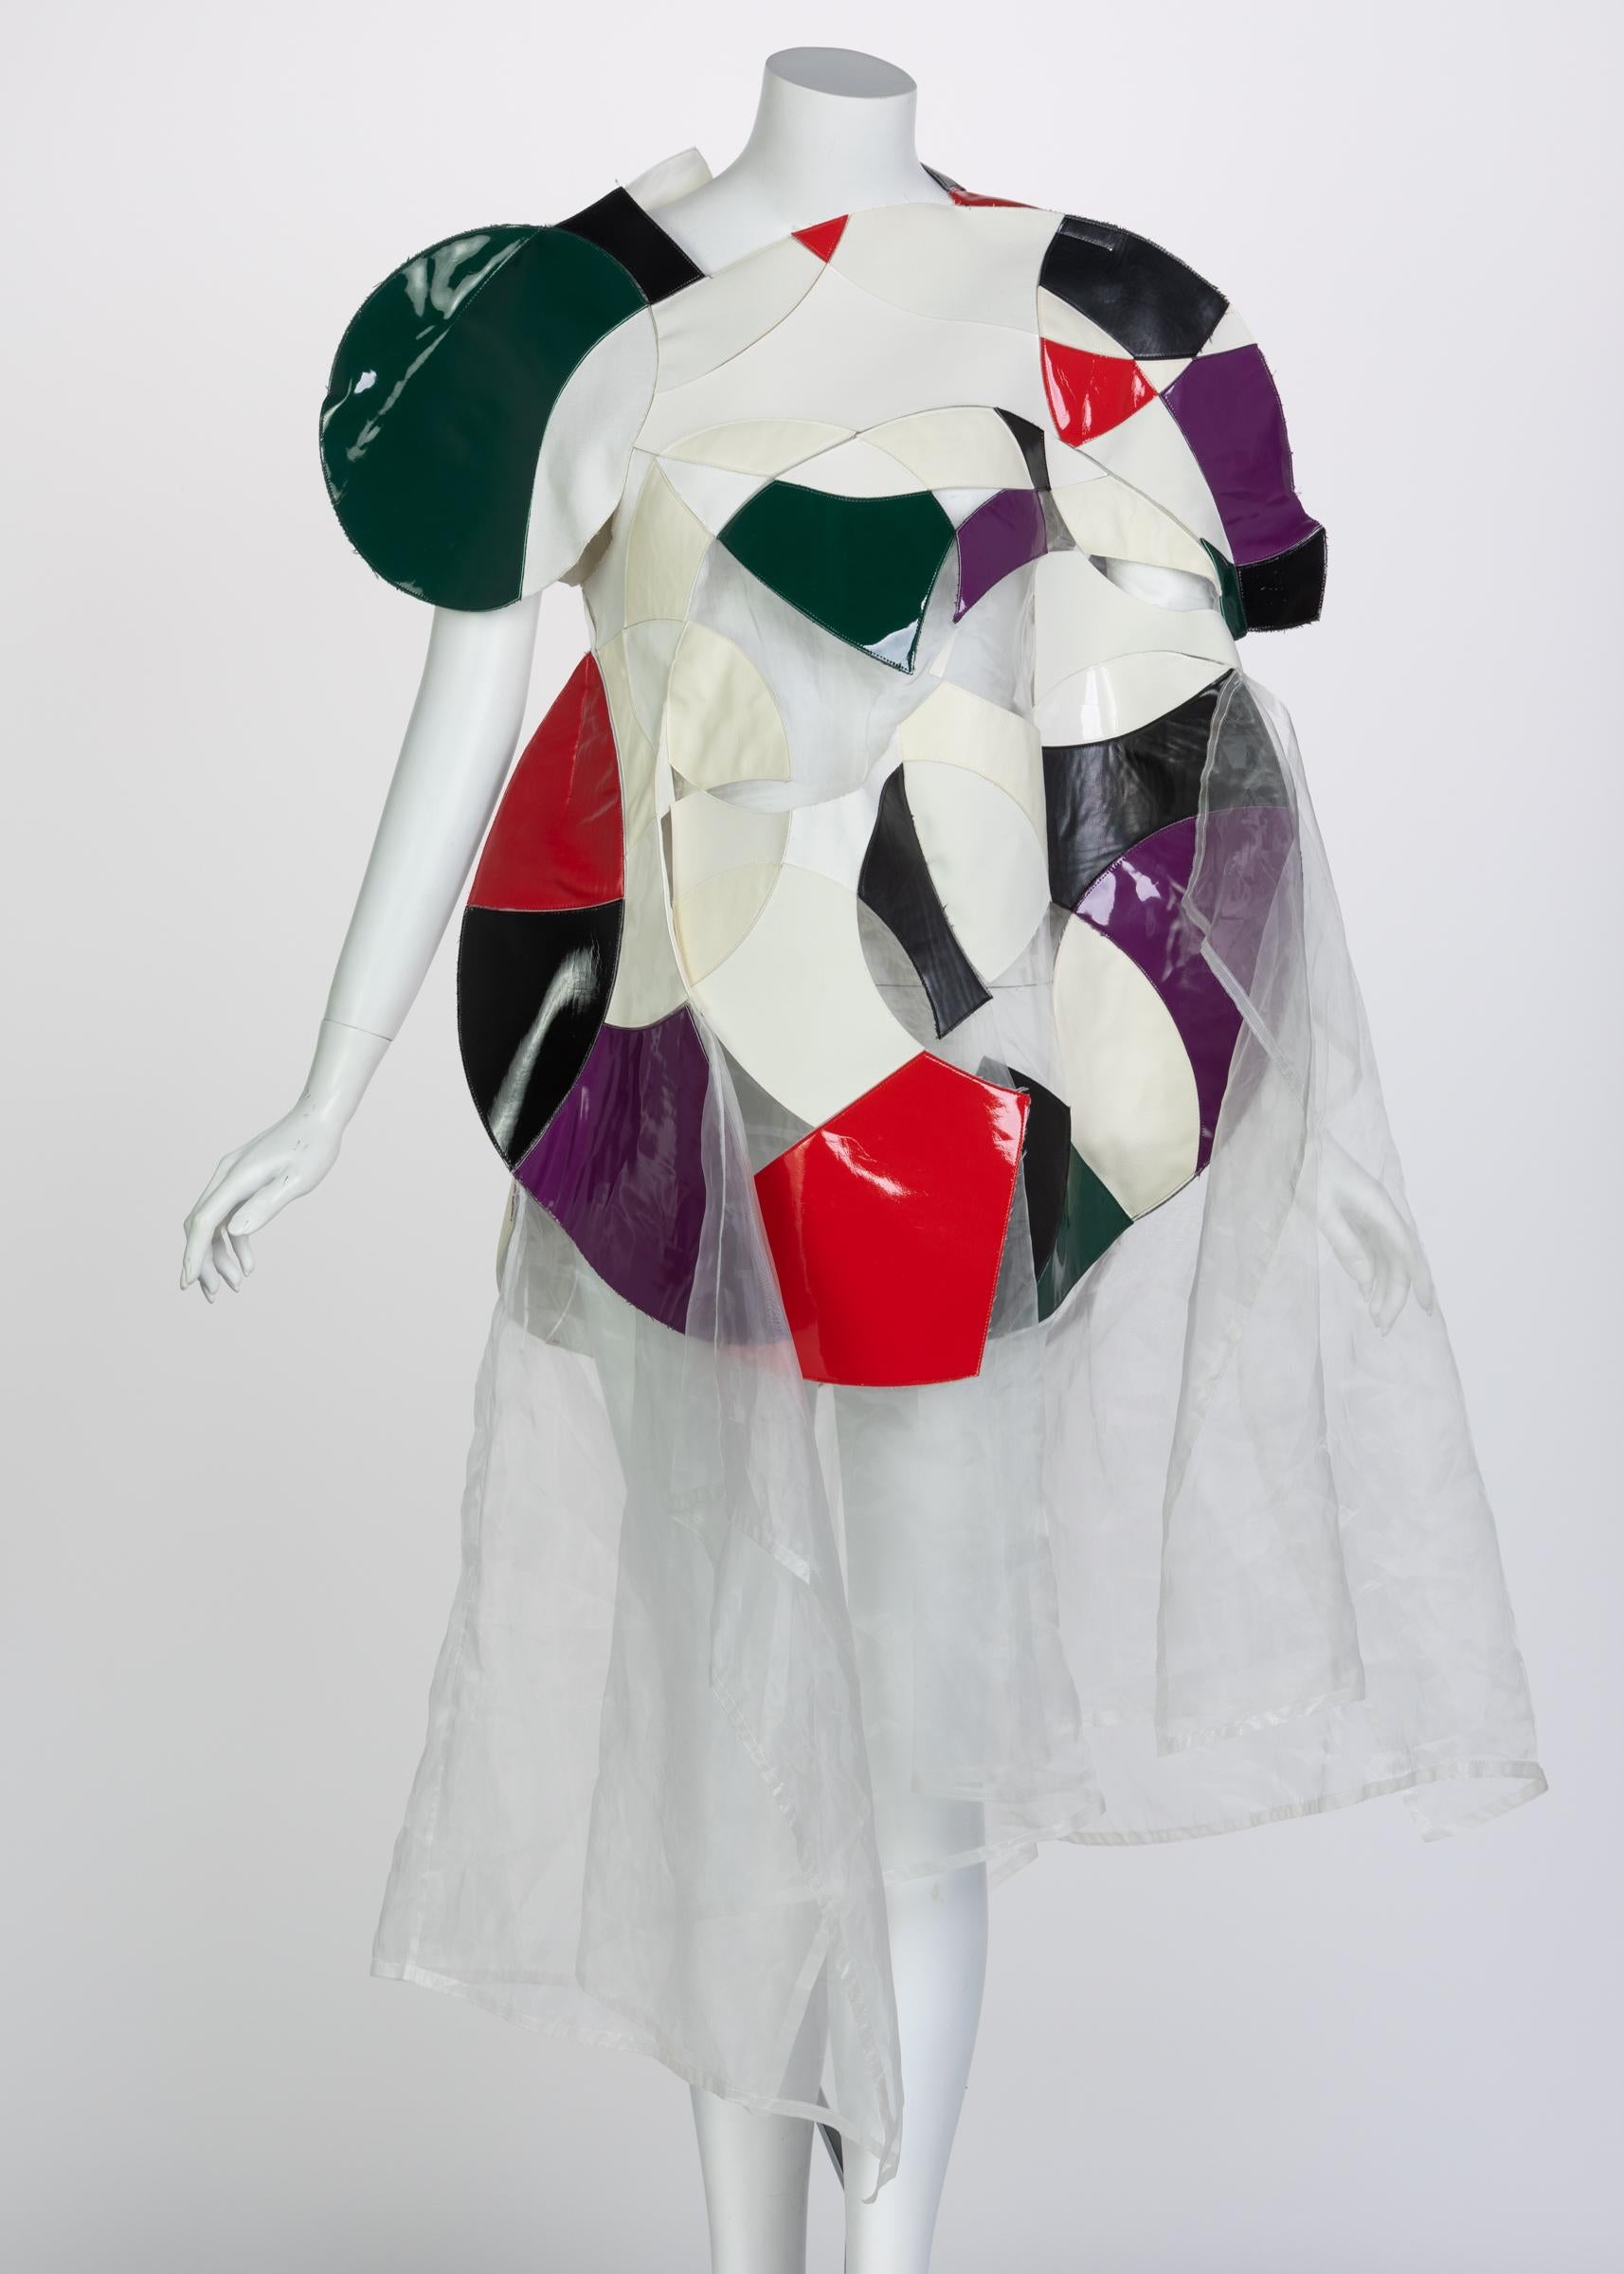 In true avant-garde form, Junya Watanabe’s Spring 2015 collection featured unexpected volumes, unconventional textiles, and bold color combinations. Paying homage to the orphic cubism style of artists and designers like Sonia Delaunay, Watanabe took